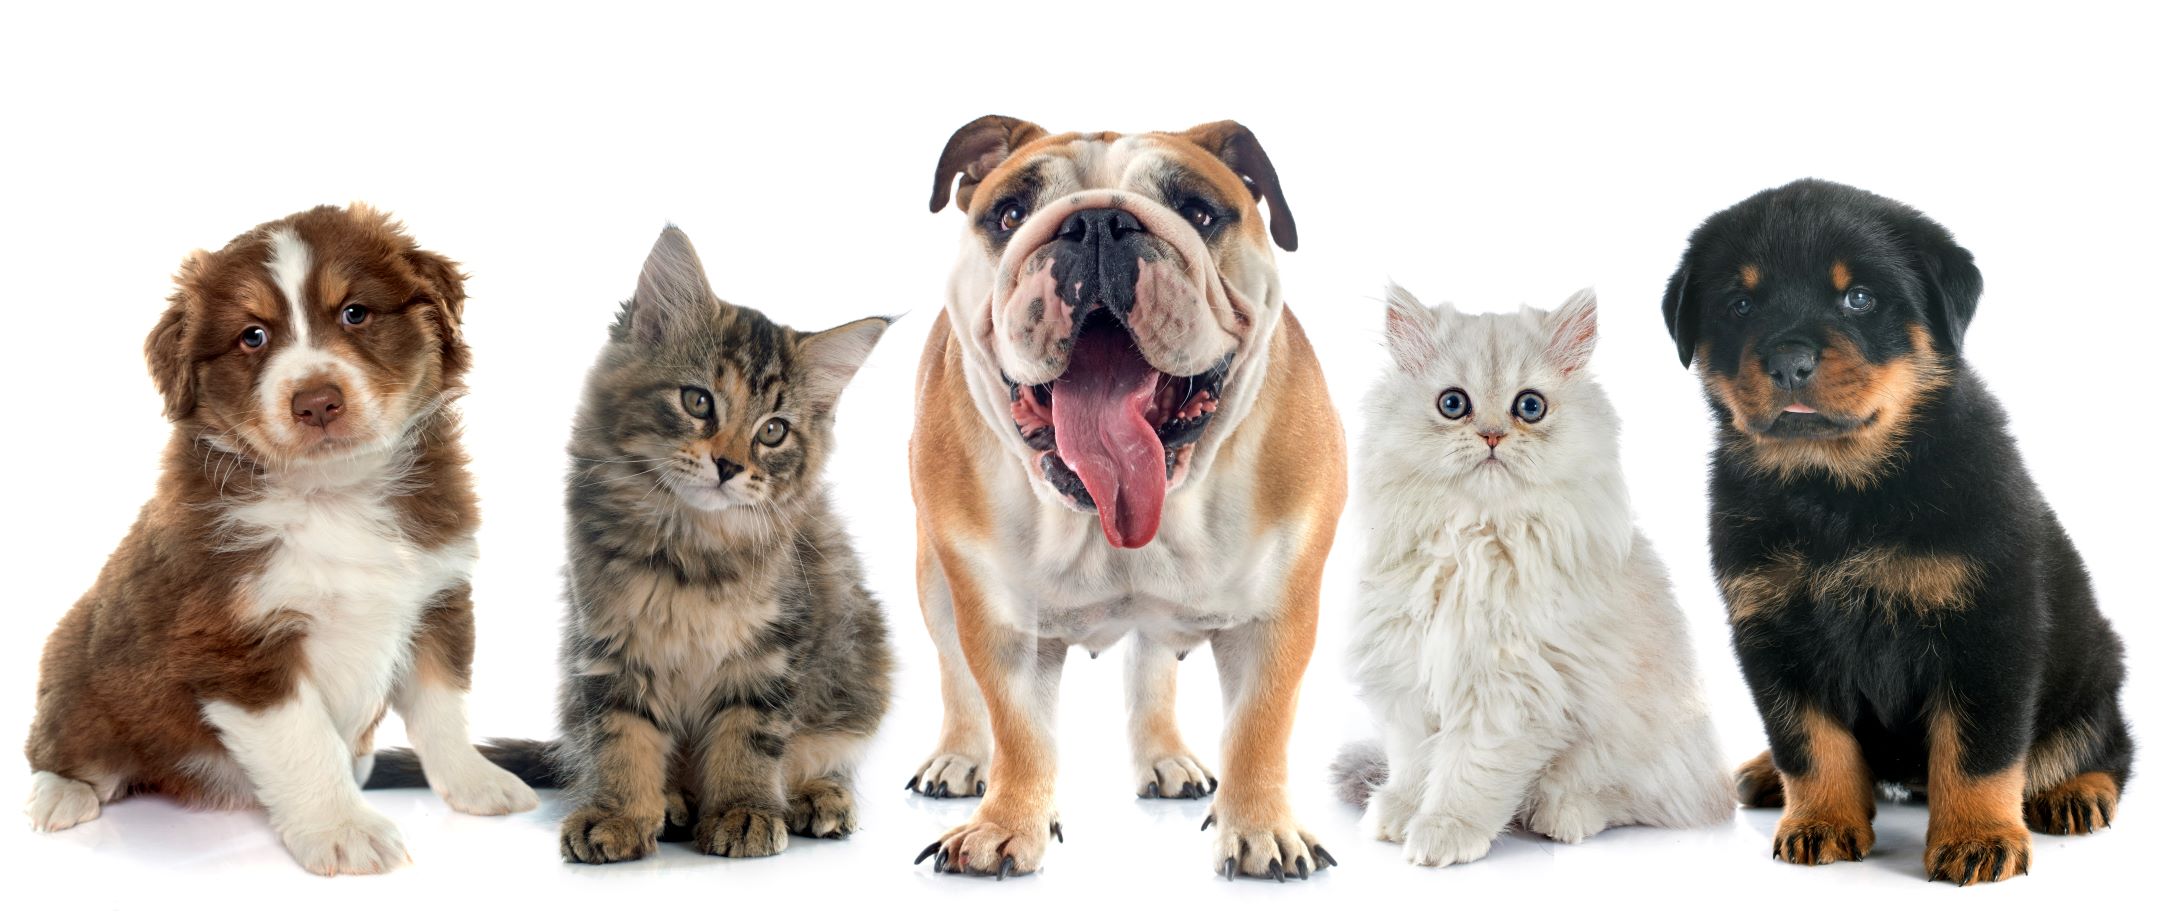 image of cats and dogs